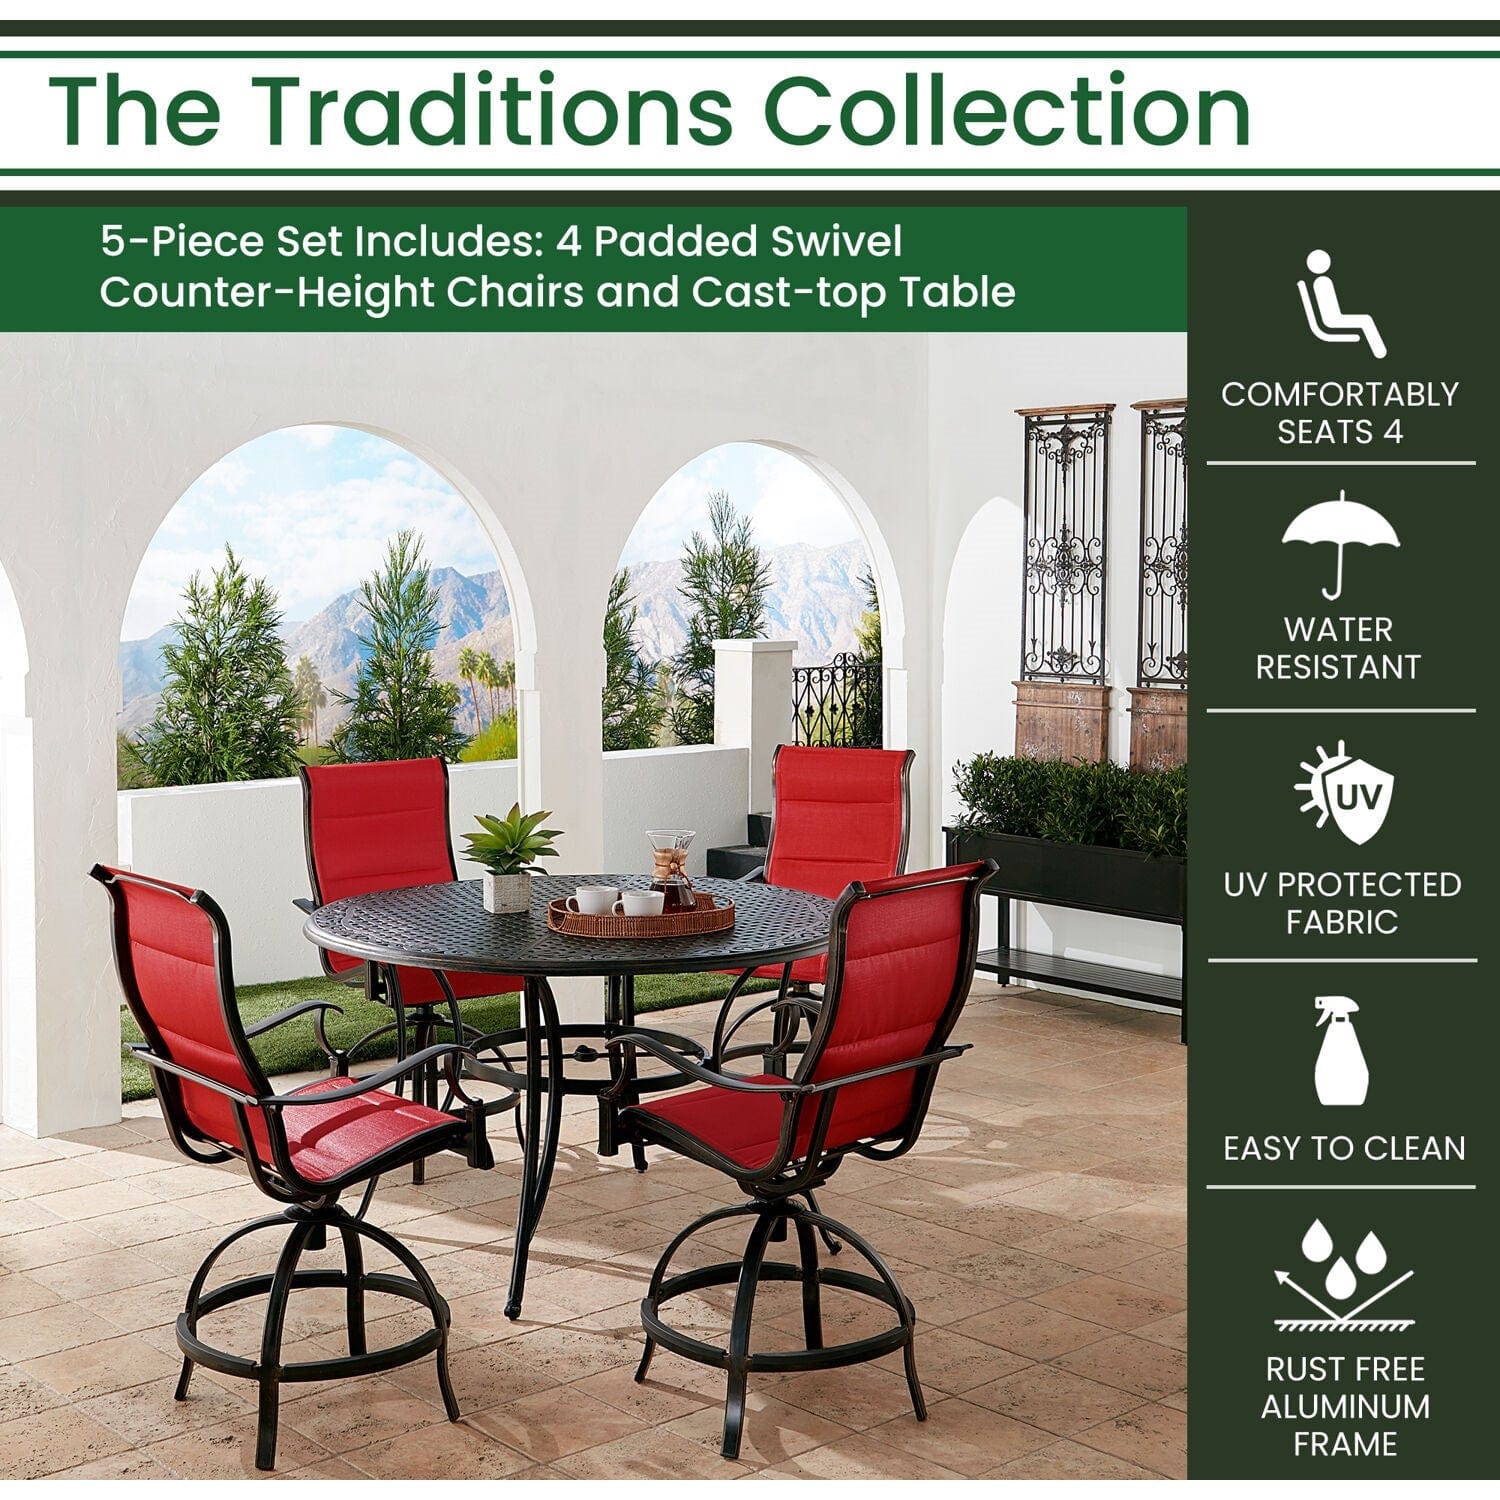 Hanover Outdoor Dining Set Hanover Traditions 5-Piece Aluminium Frame High-Dining Set in Red with 4 Padded Swivel Counter-Height Chairs and 56-in. Cast-top Table | TRADDN5PCPDBR-RED